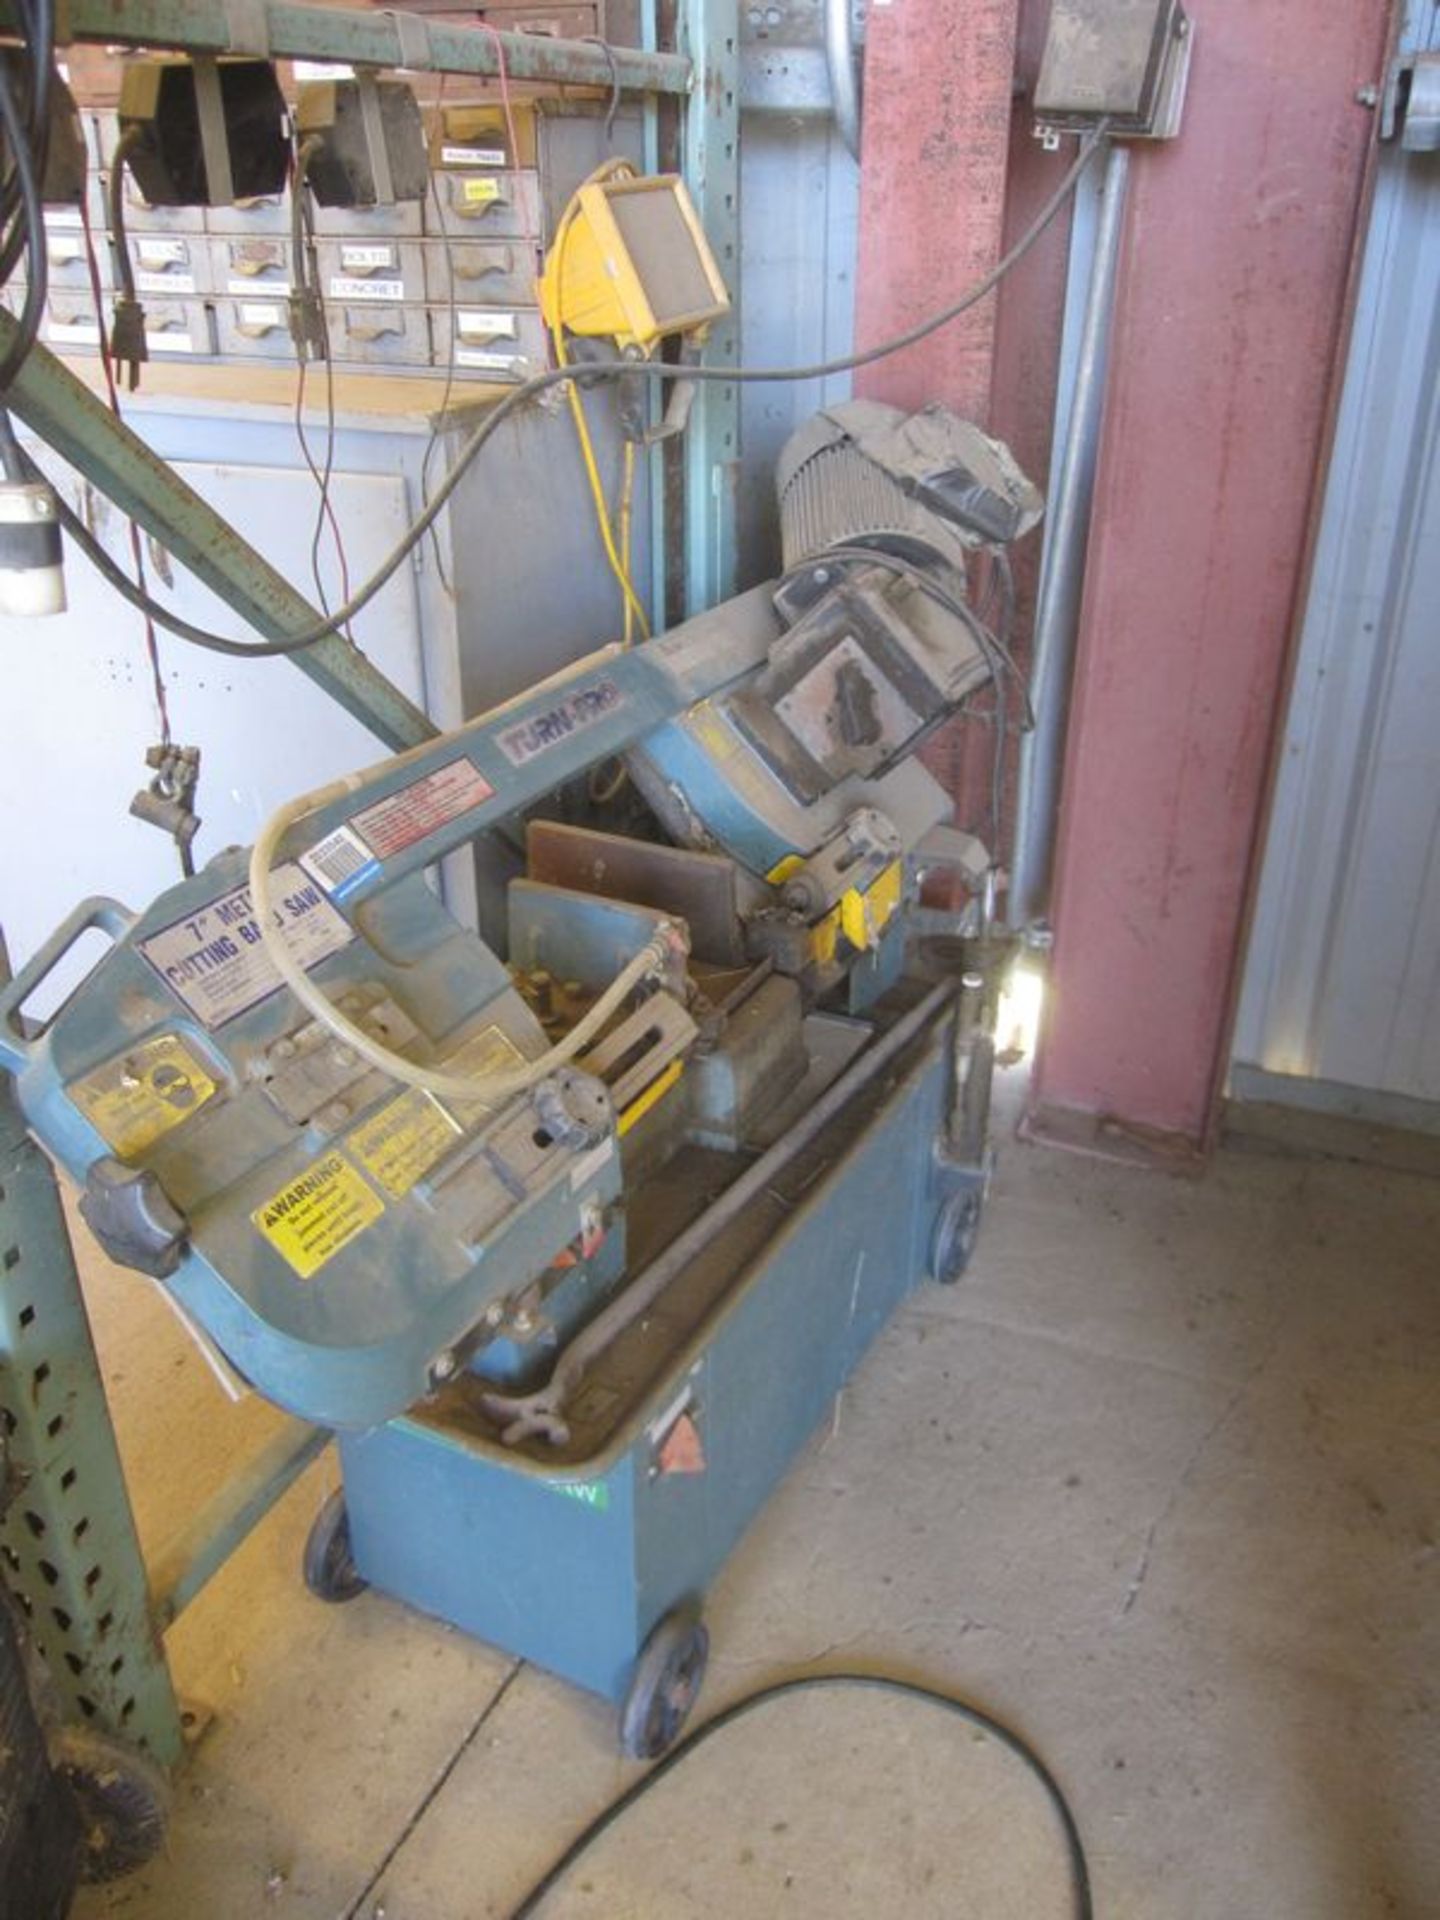 Turn-Pro Model 01712058  7" Metal Cutting Band Saw , Serial Number: 5107061 (Sub Location: